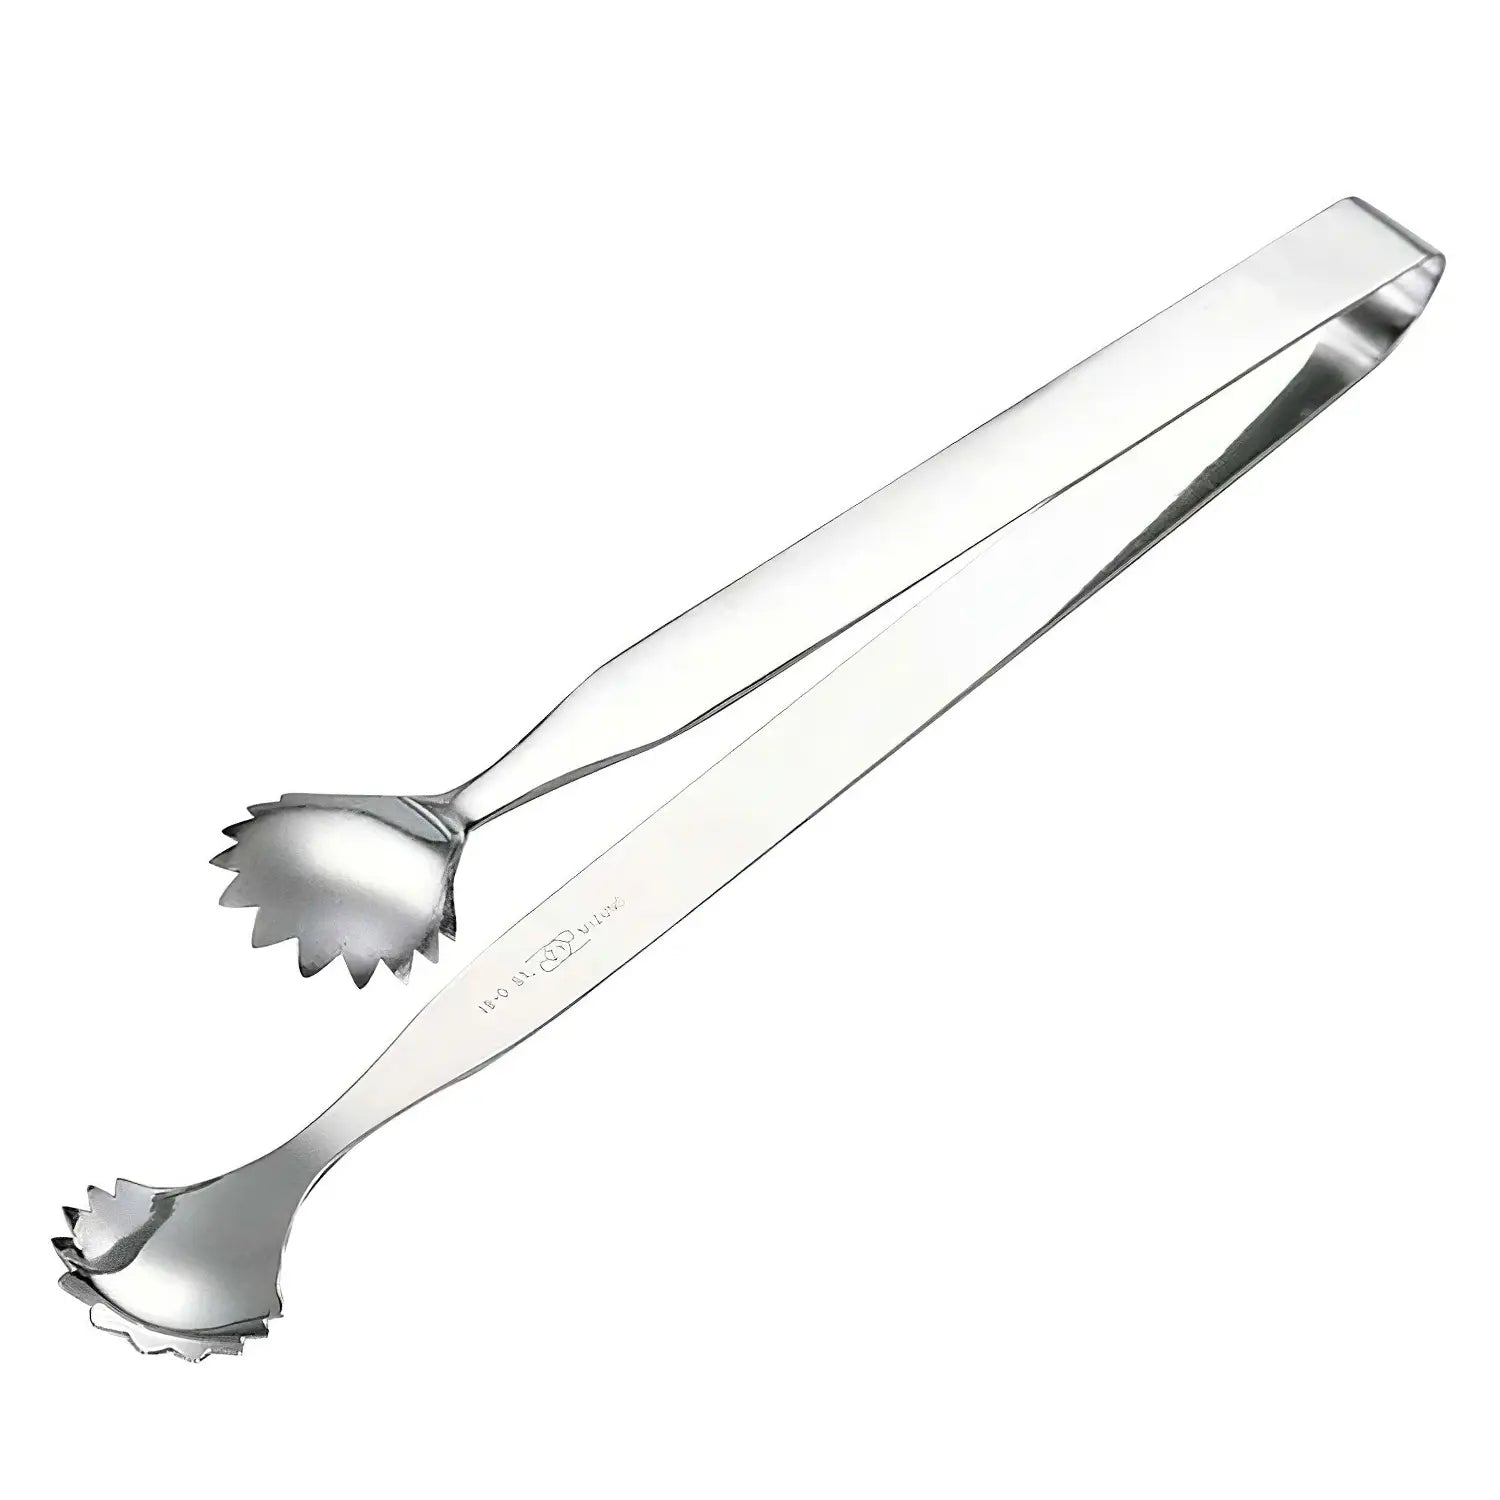 EBM Stainless Steel Clever Chopstick Tongs 245310 - Globalkitchen Japan